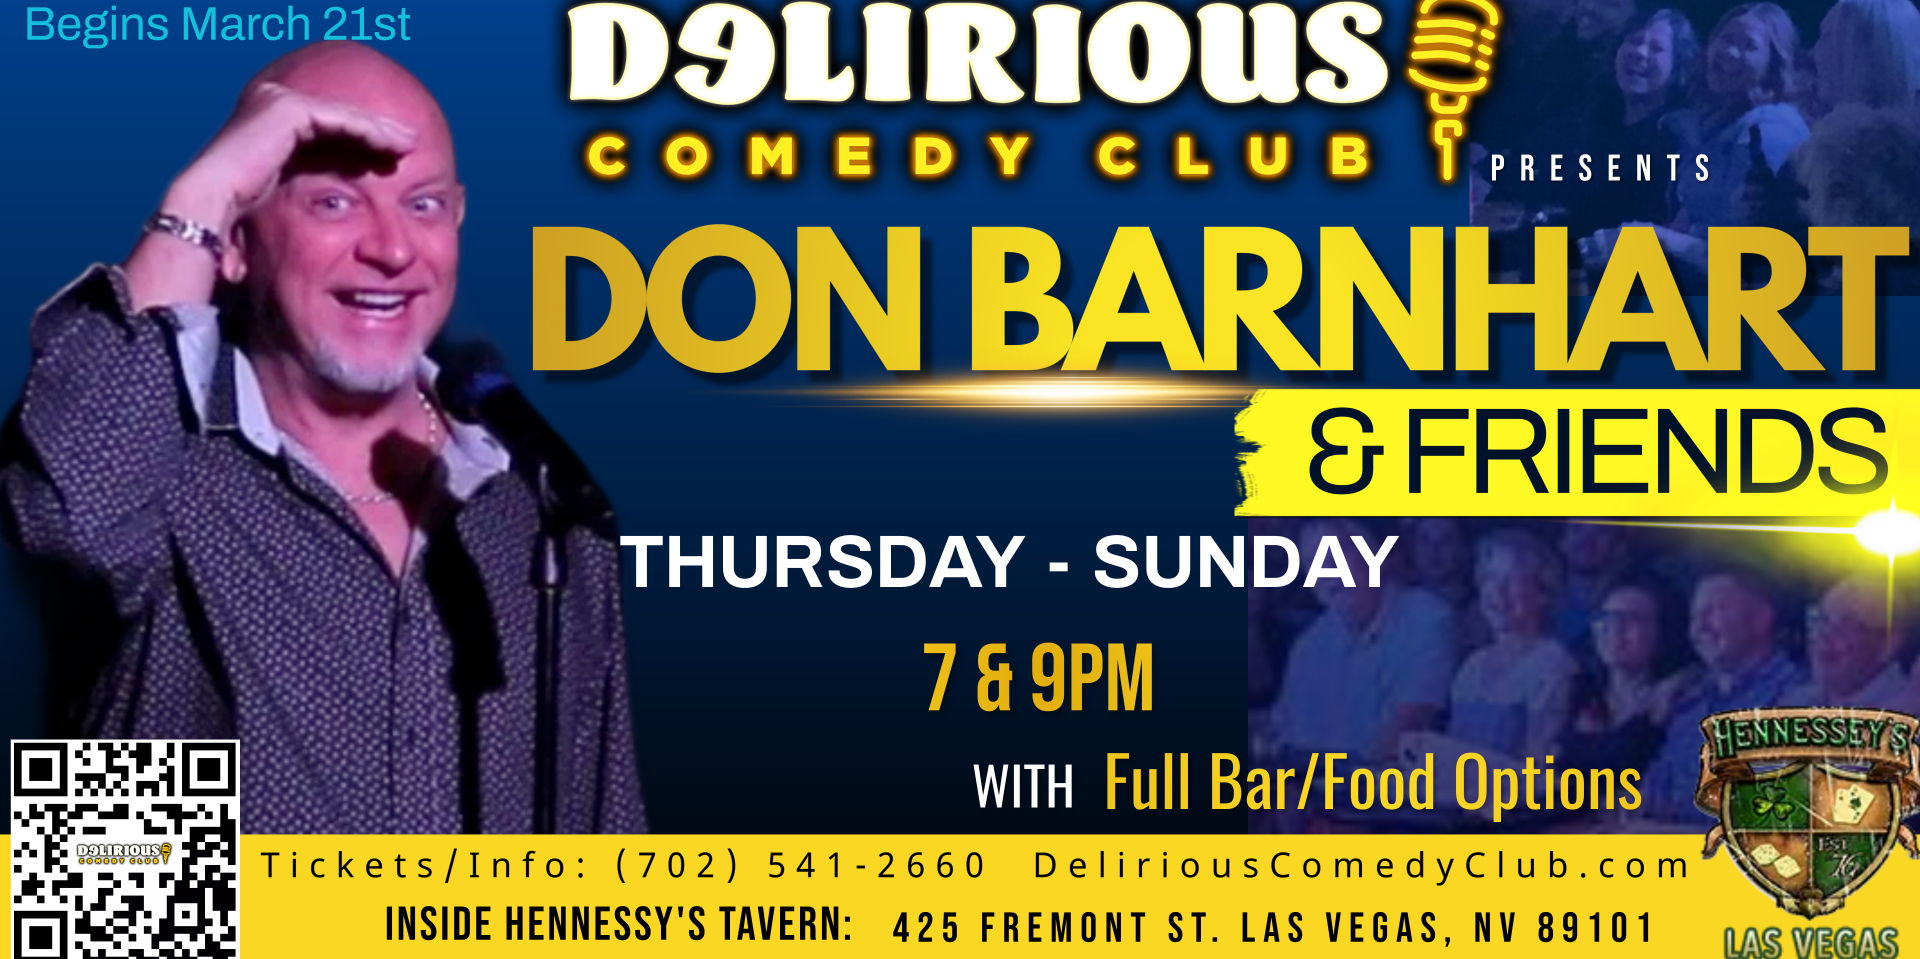 Delirious Comedy Club Expands To Larger Venue On Fremont Street promotional image